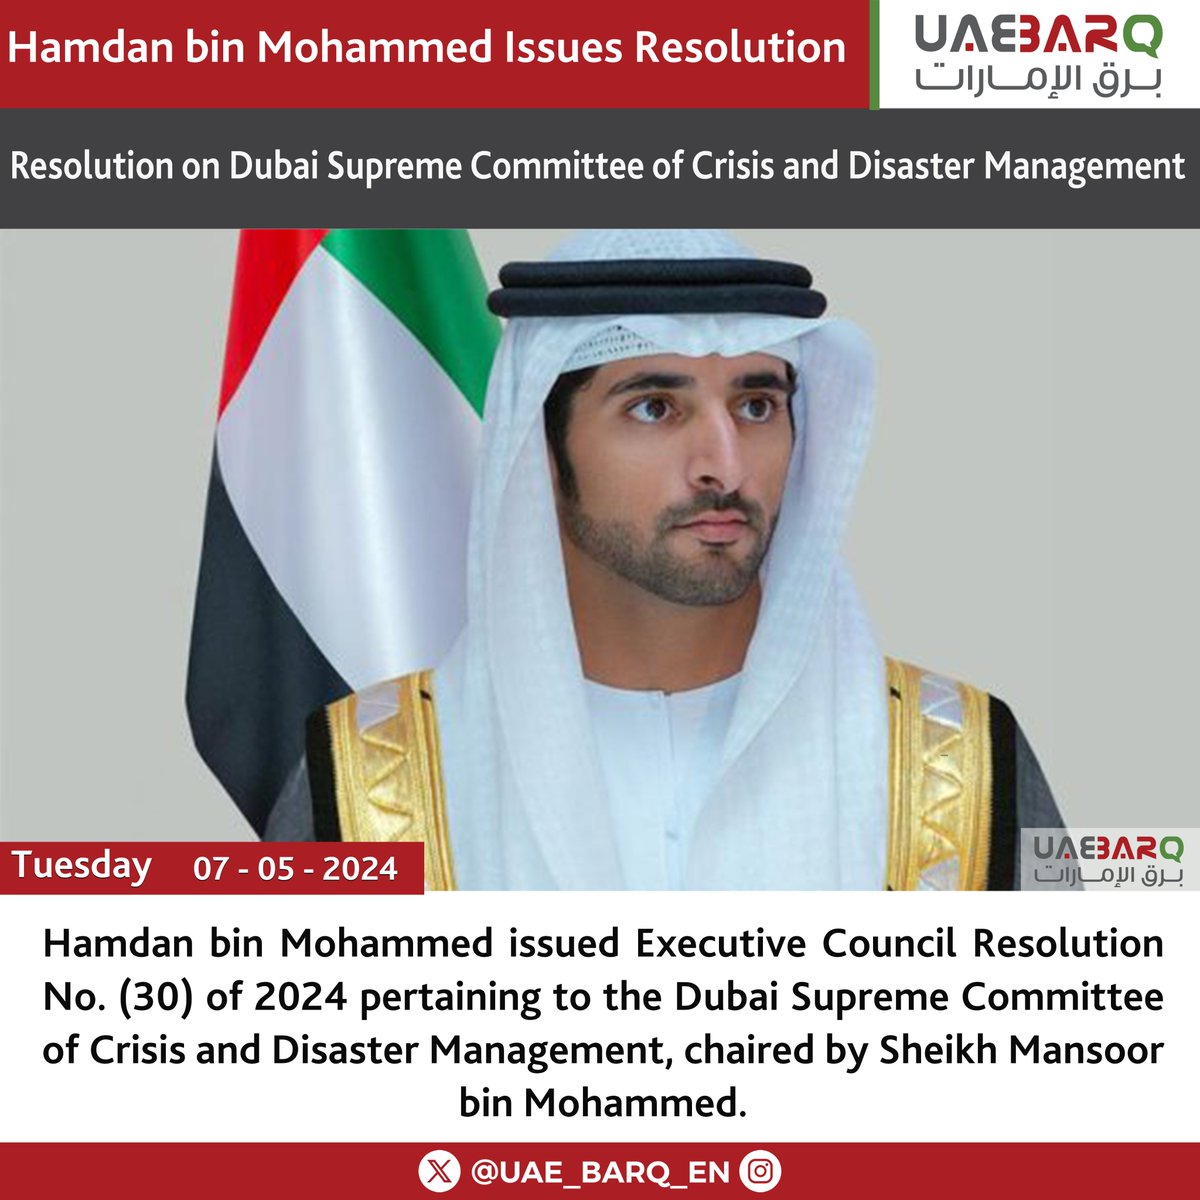 Hamdan bin Mohammed issued Executive Council Resolution No. (30) of 2024 pertaining to the Dubai Supreme Committee of Crisis and Disaster Management, chaired by Sheikh Mansoor bin Mohammed. Members of the Committee include the Chairman of Dubai’s State Security Department;…